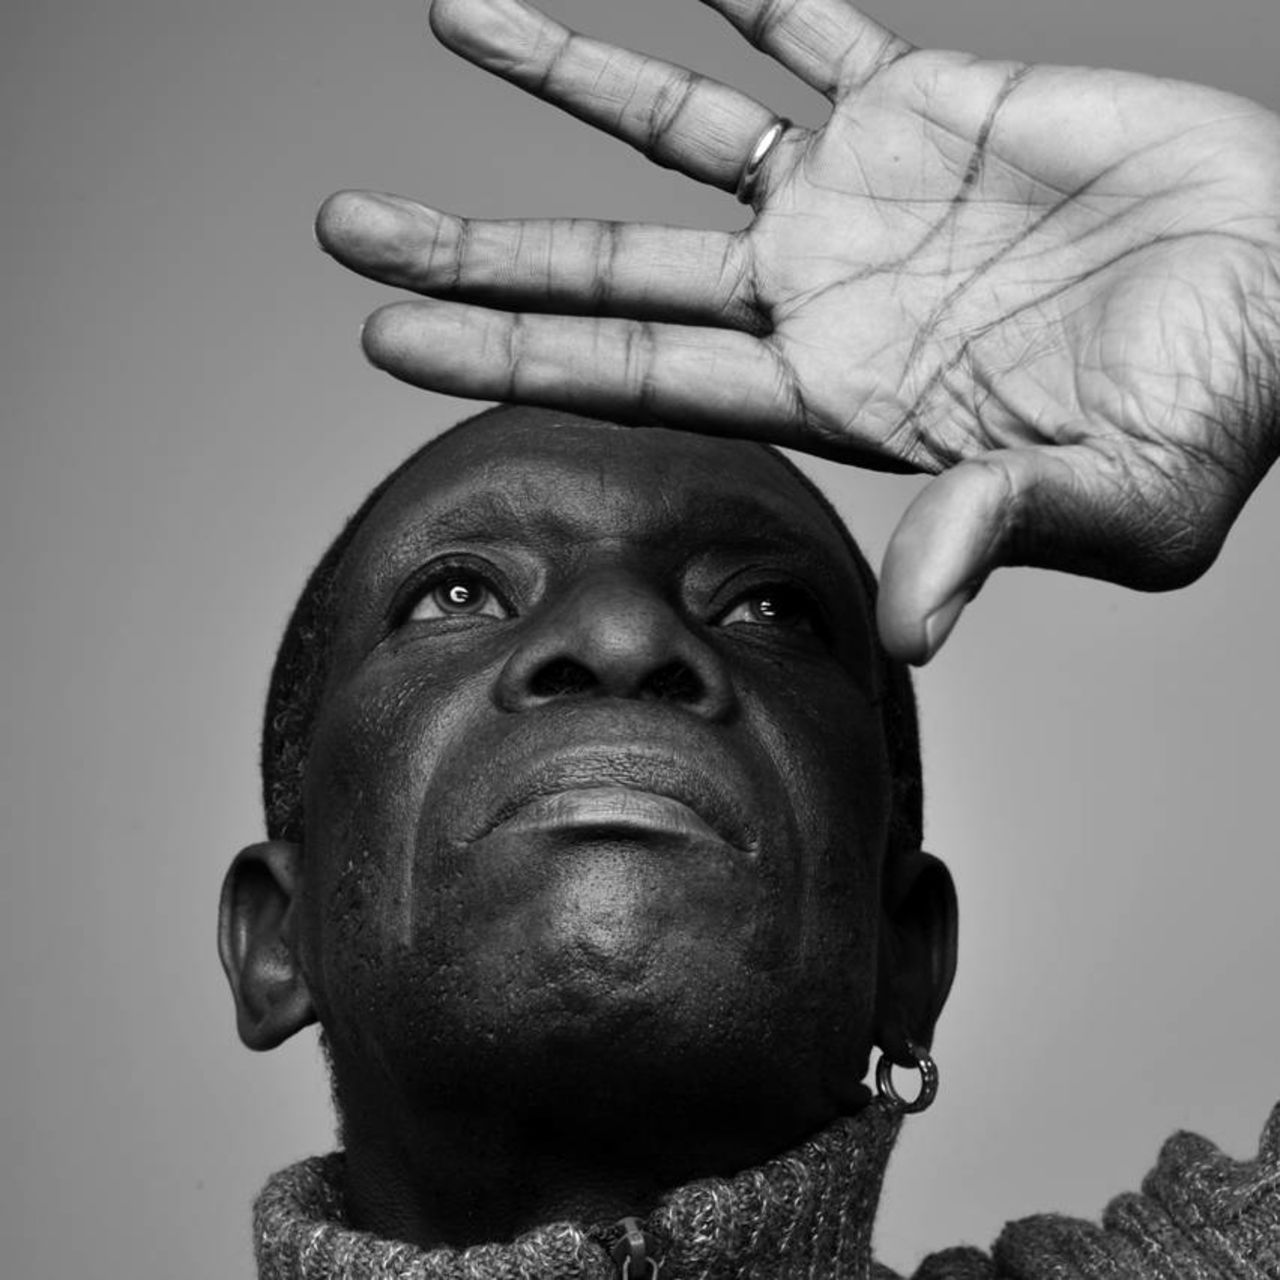 Brian Eno has hailed Allen as the "greatest living drummer," while Fela himself said that "there would be Afrobeat without Tony Allen." 